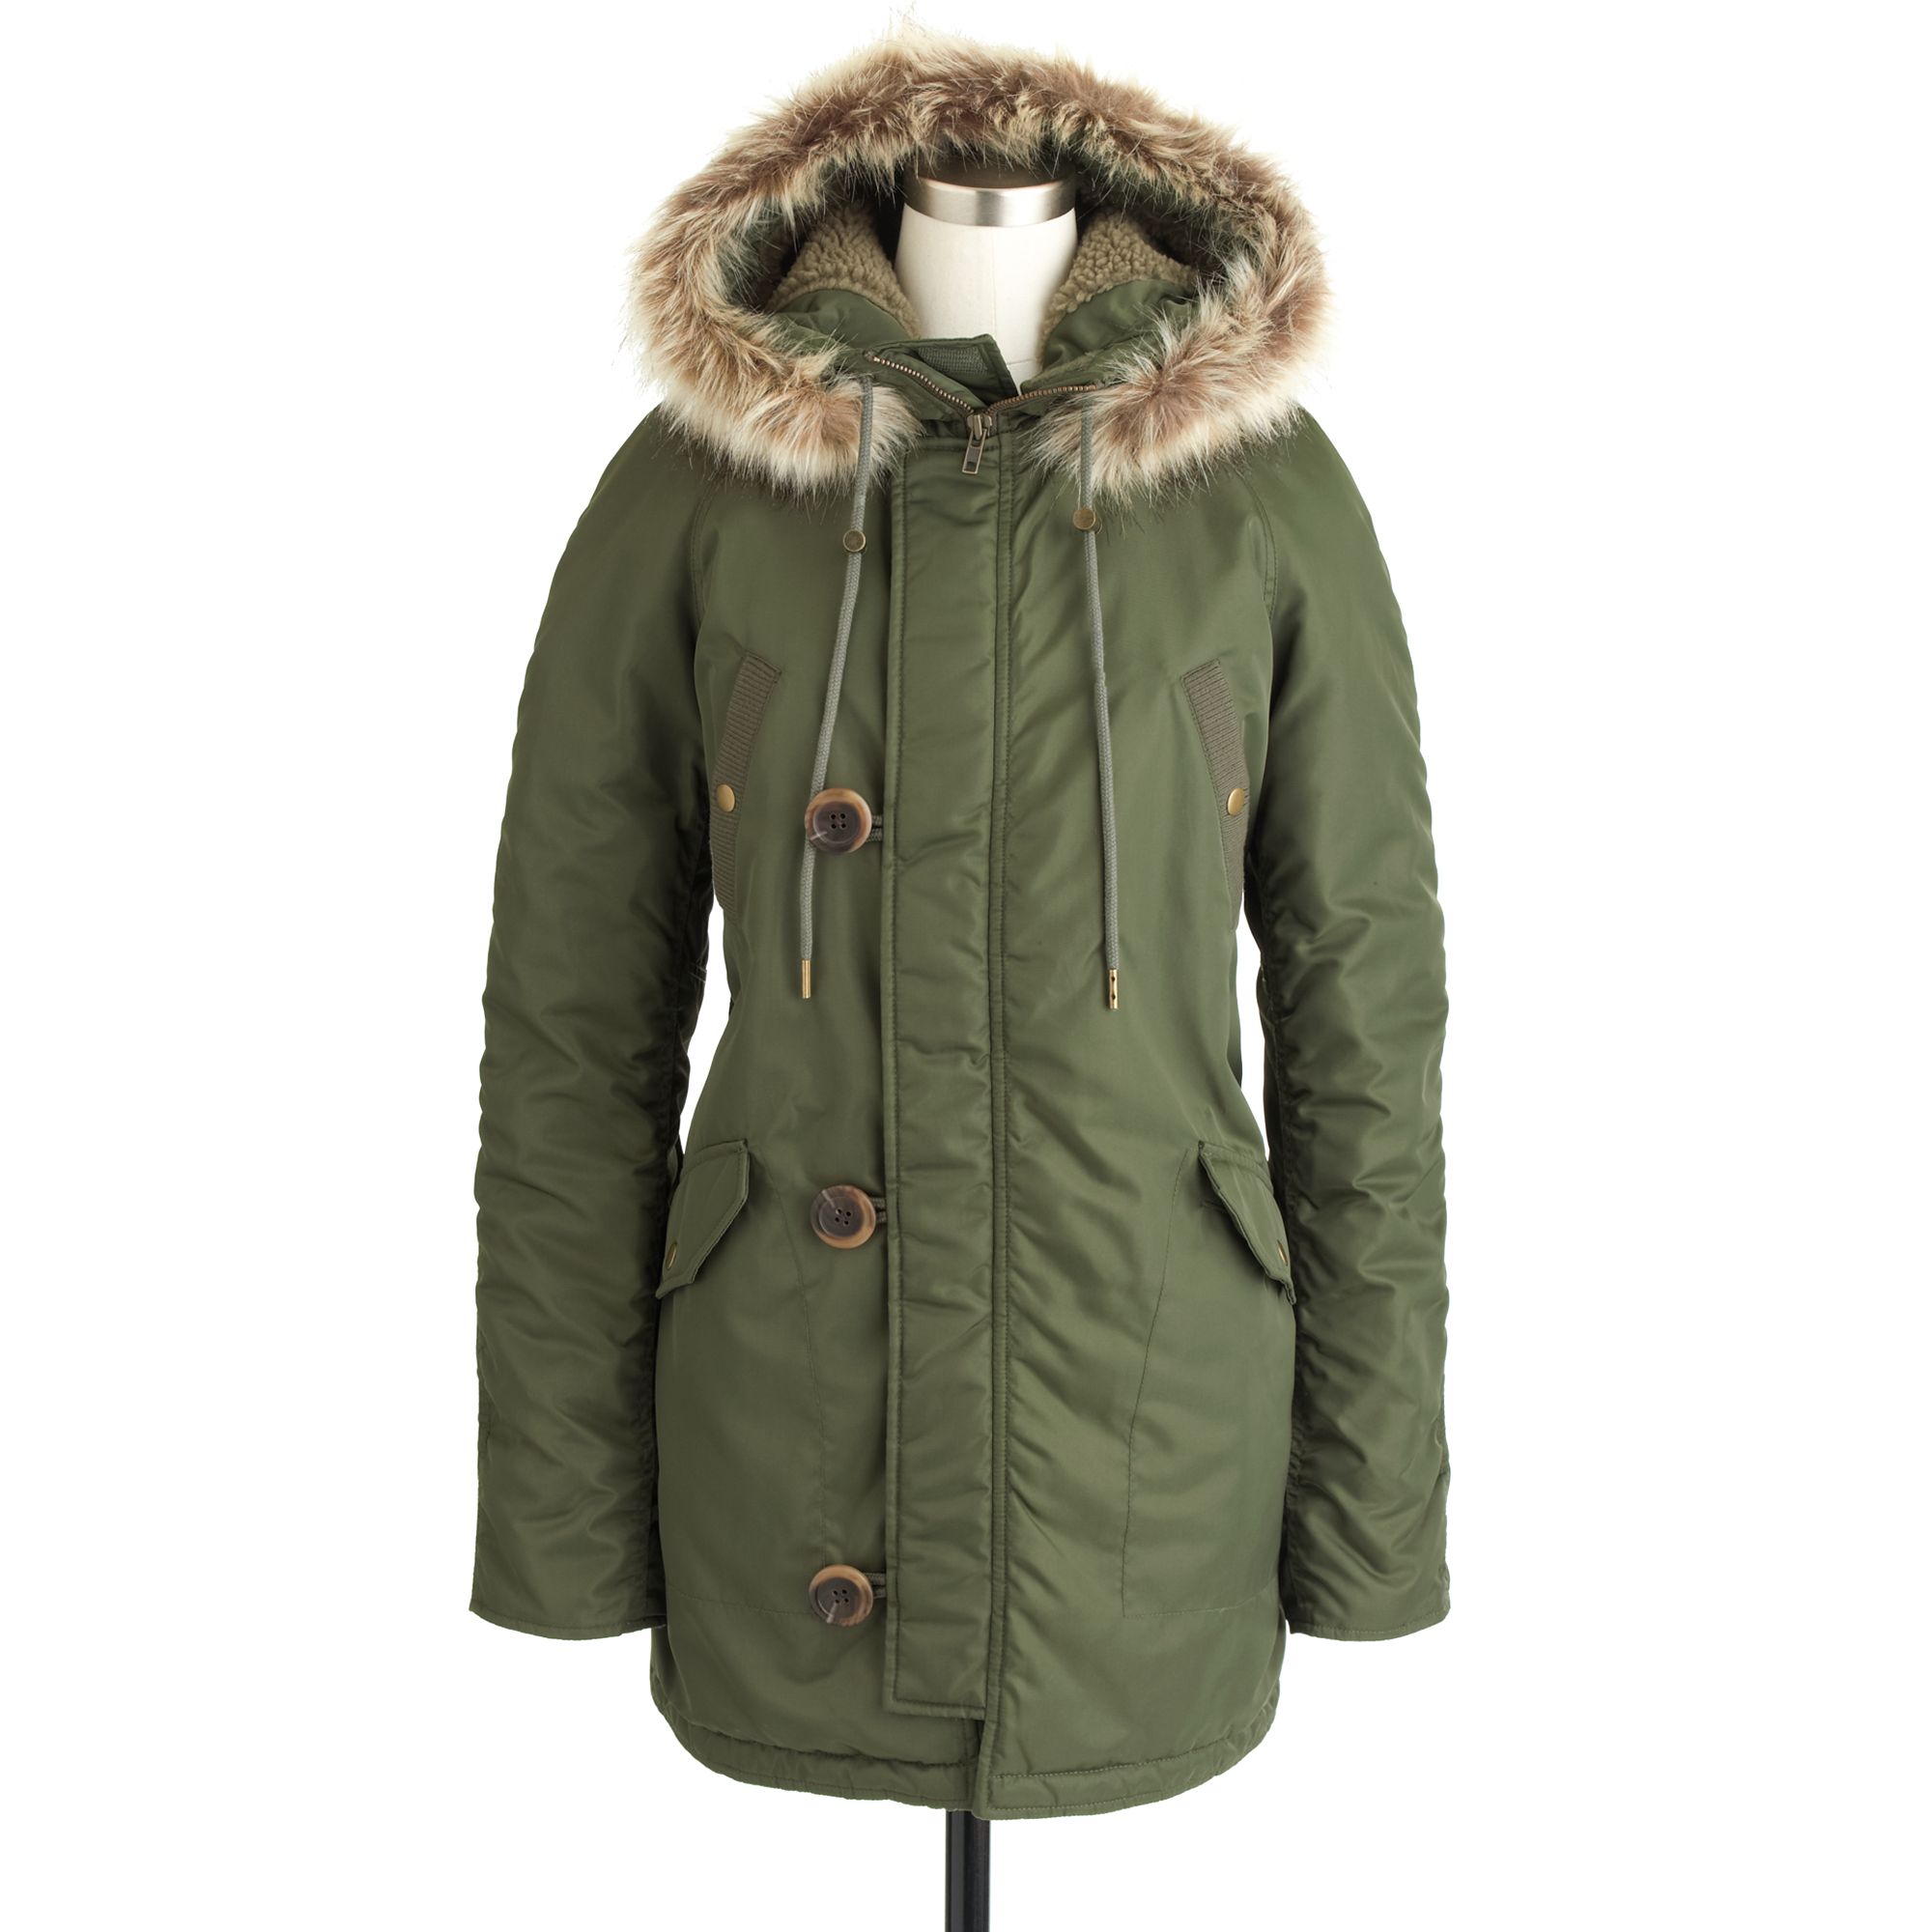 J.Crew Military Parka in Green - Lyst